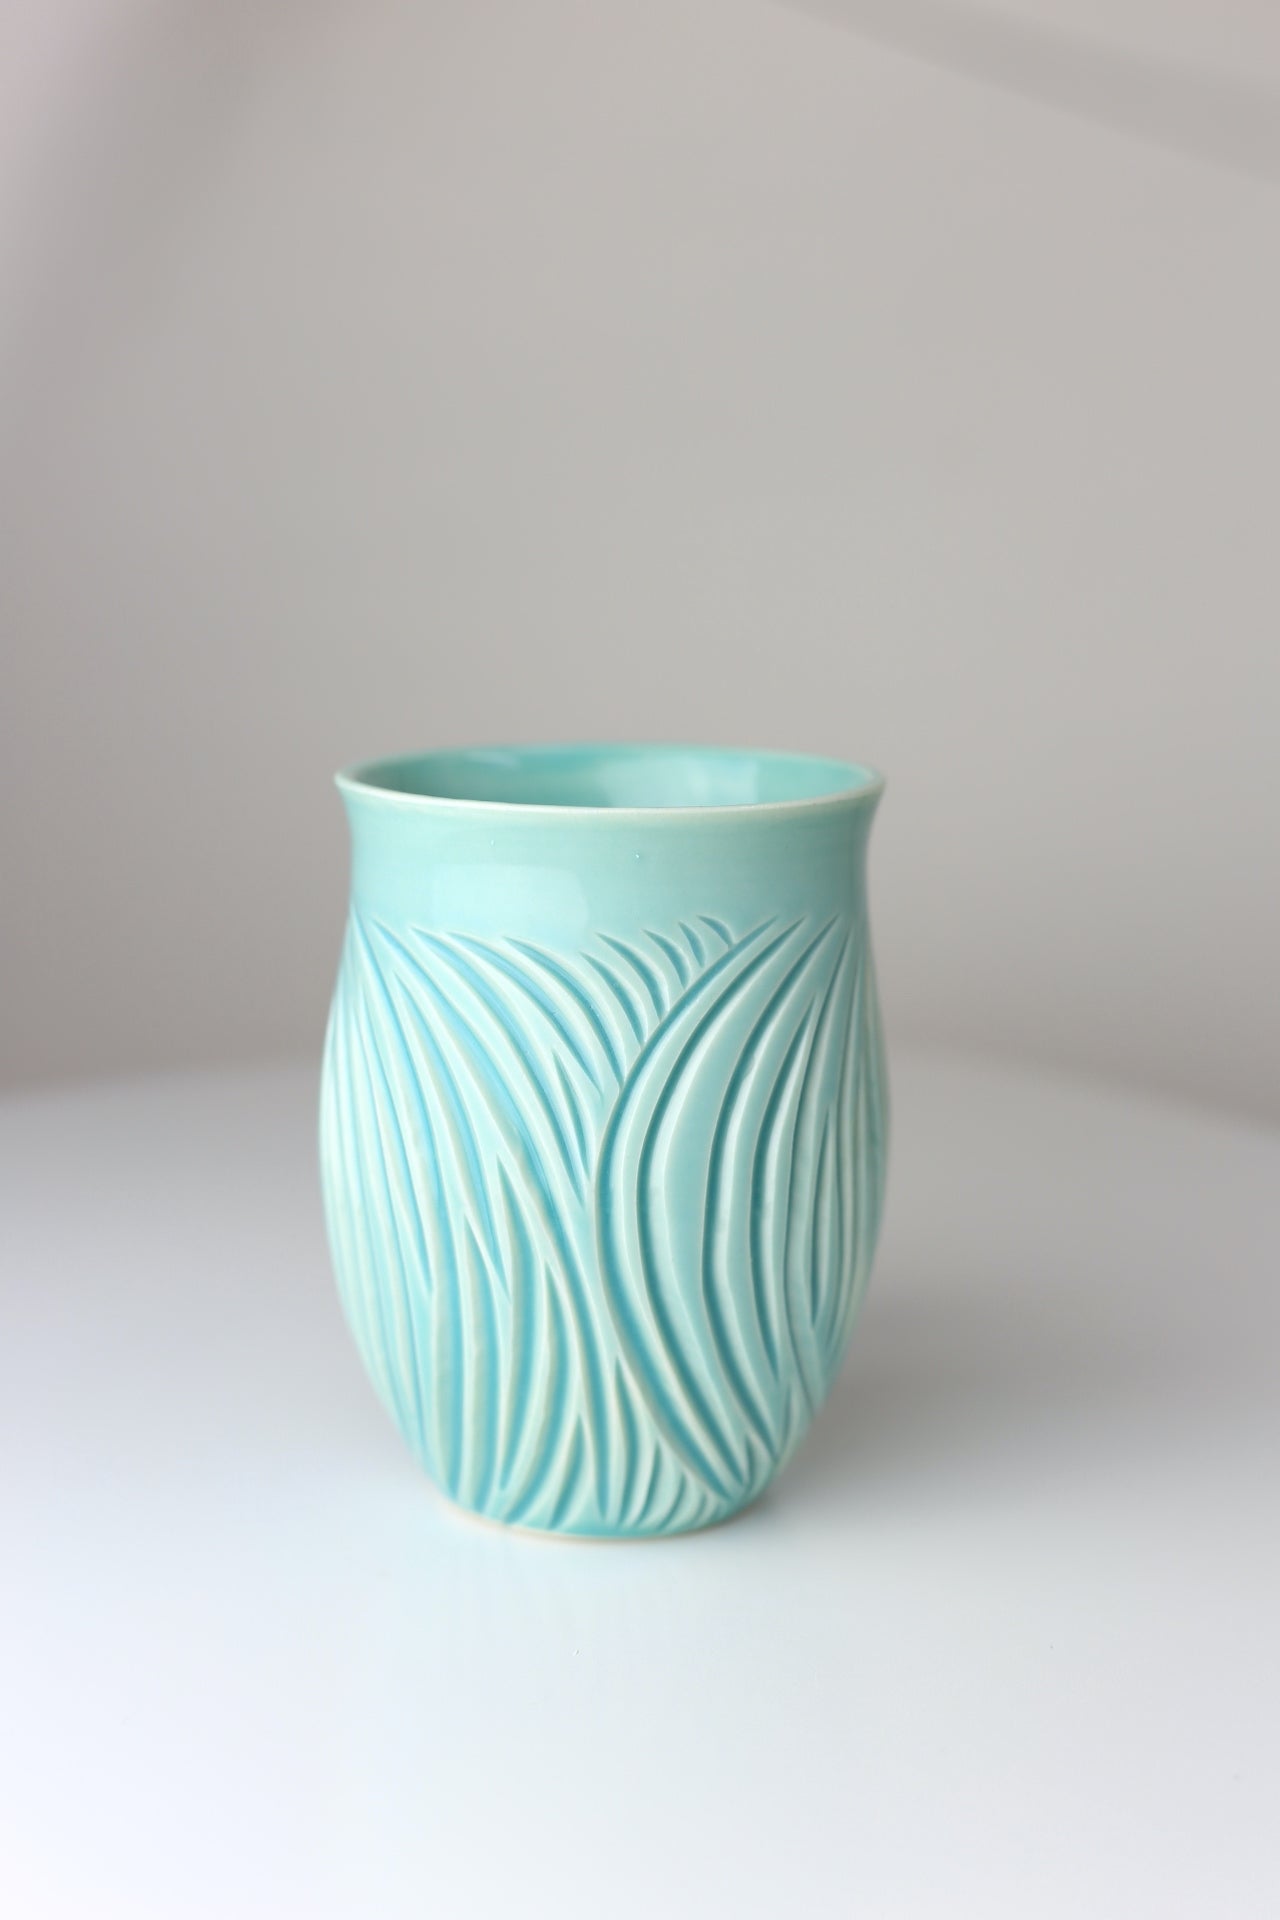 Large porcelain mug with abstract carvings in turquoise